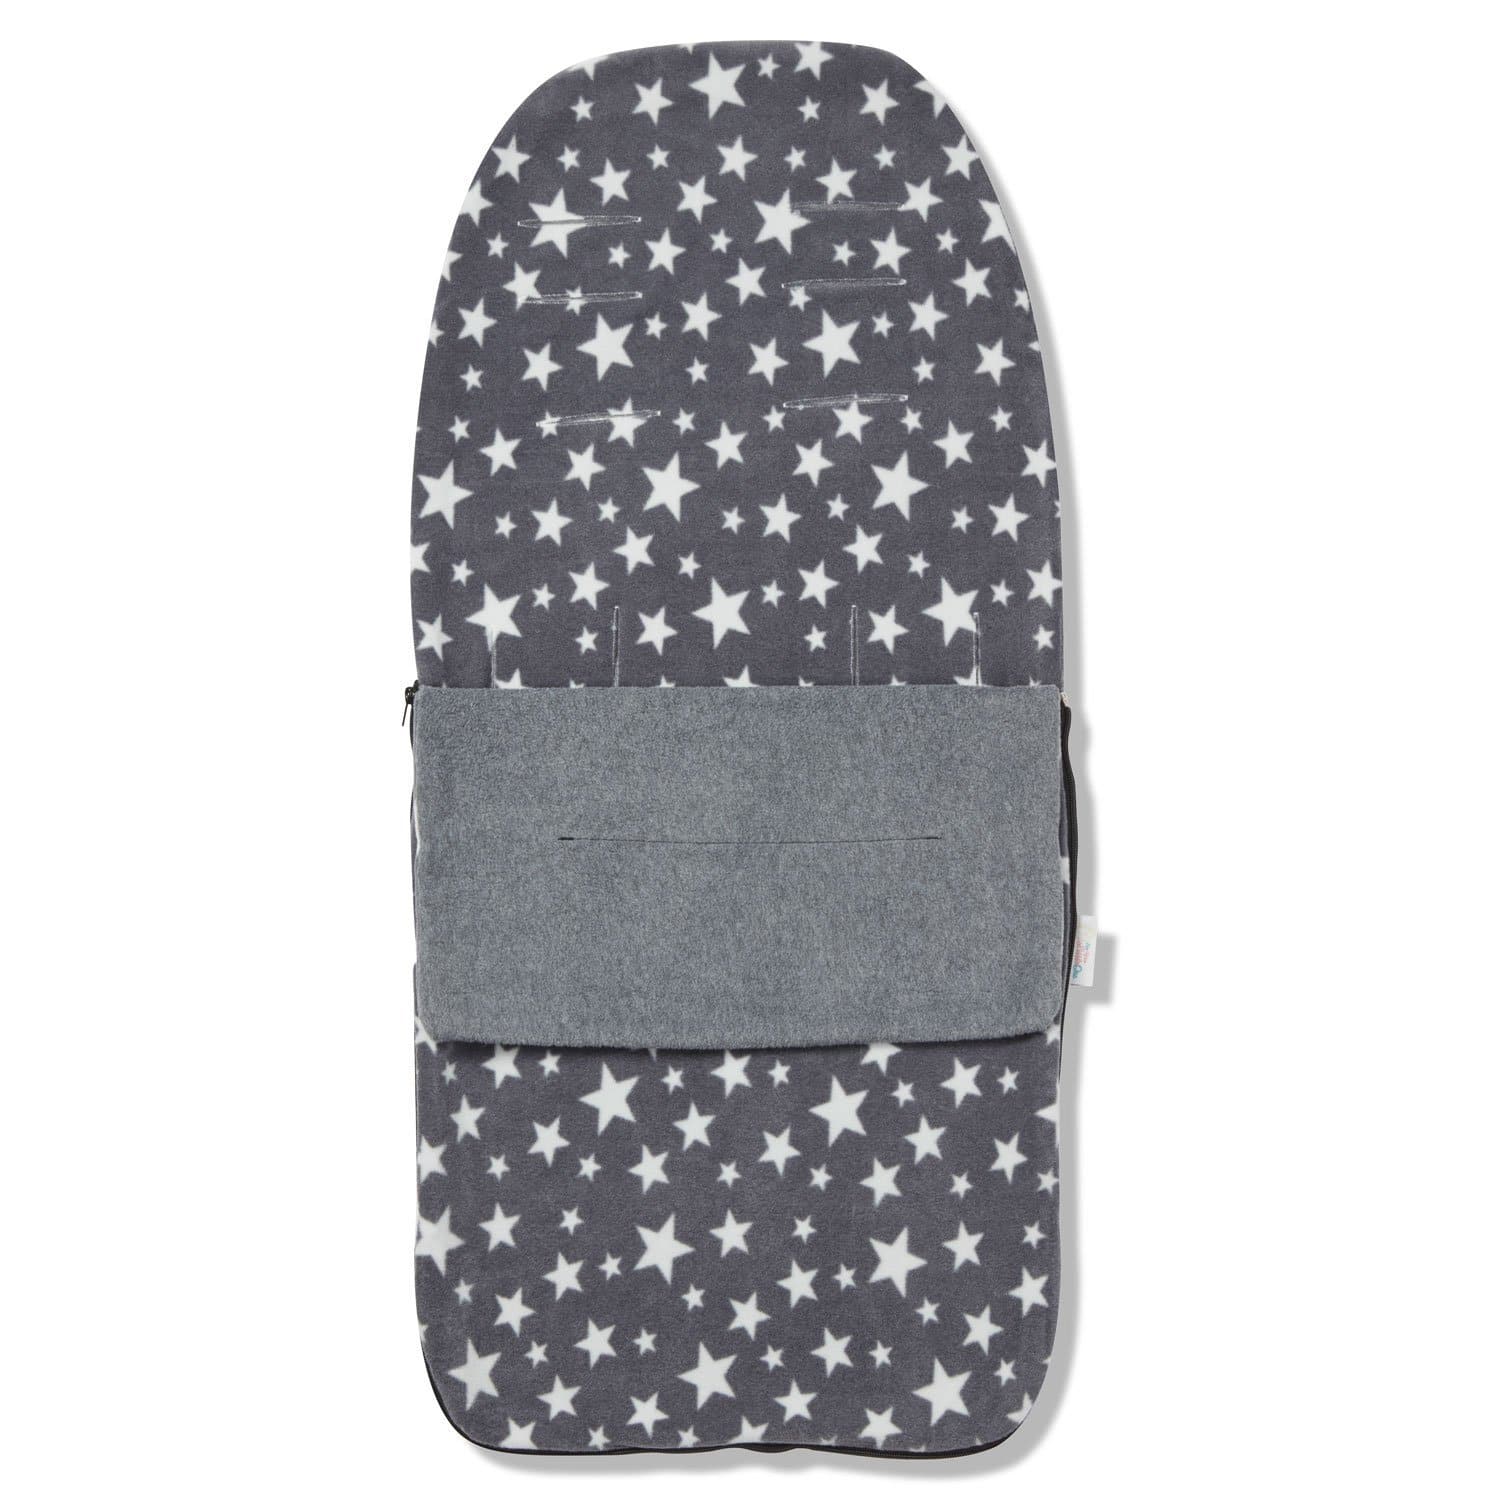 Snuggle Summer Footmuff Compatible with Mima - For Your Little One